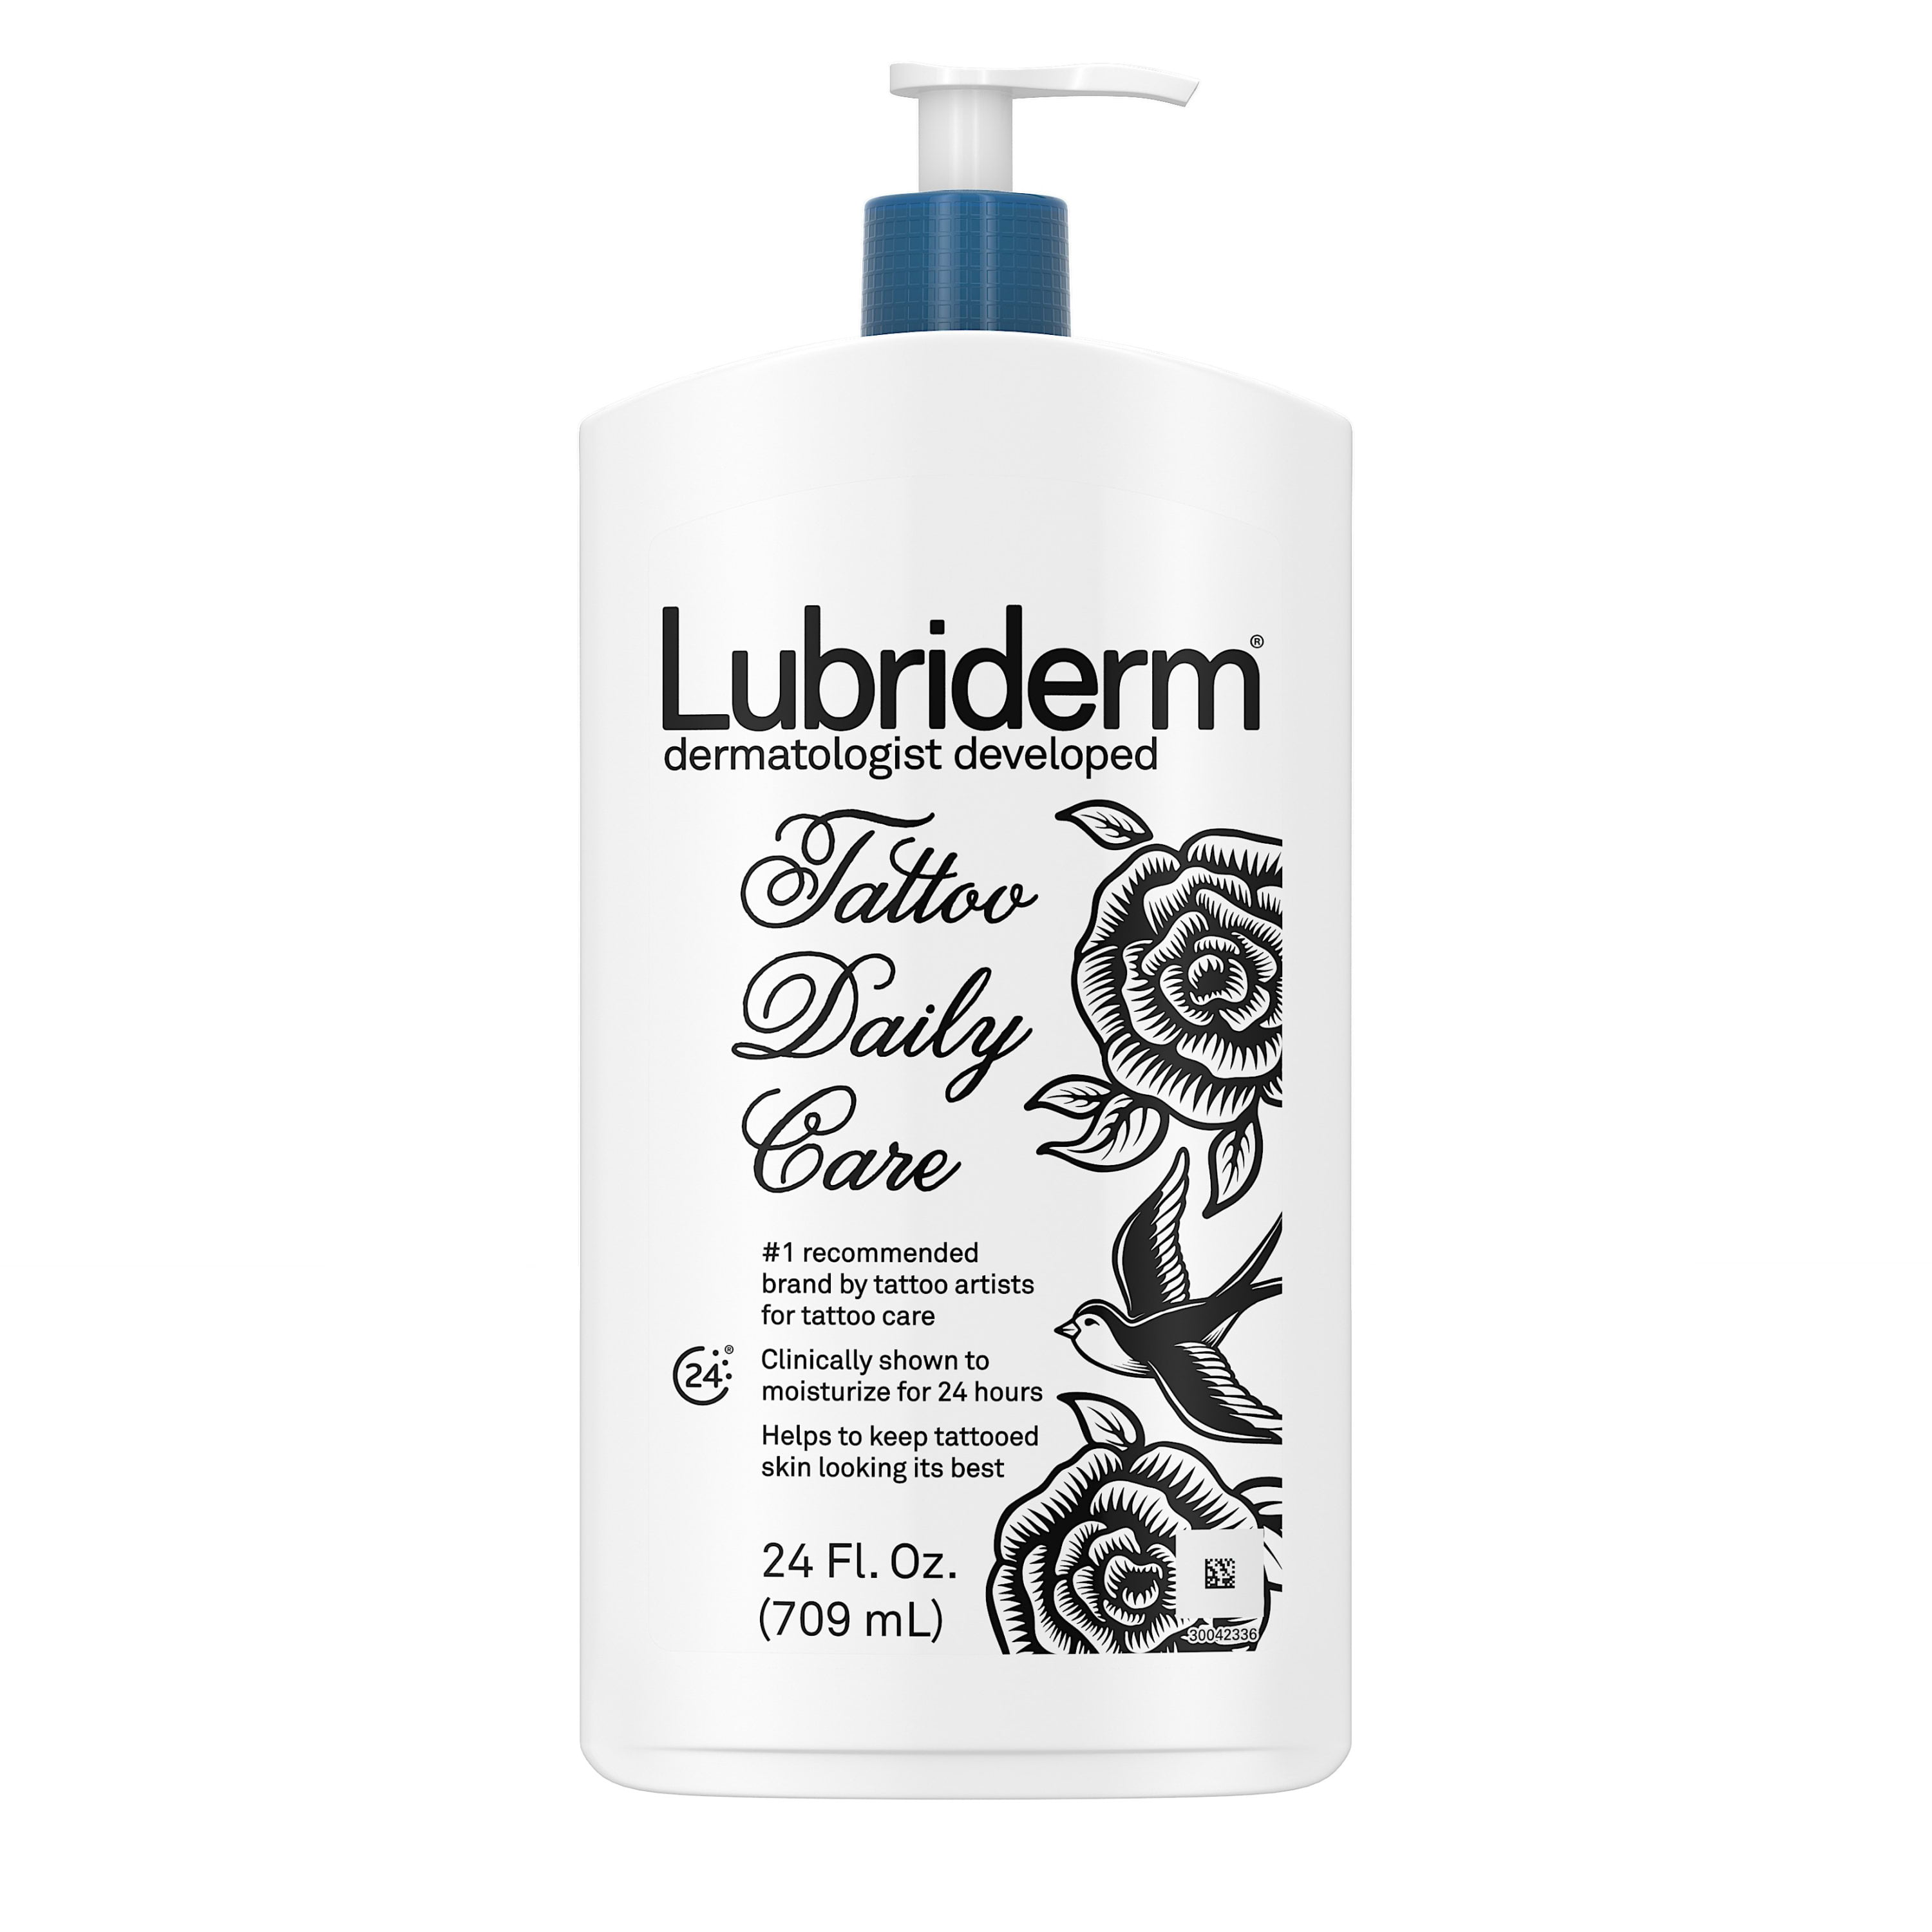 Which lubriderm lotion is best for tattoos